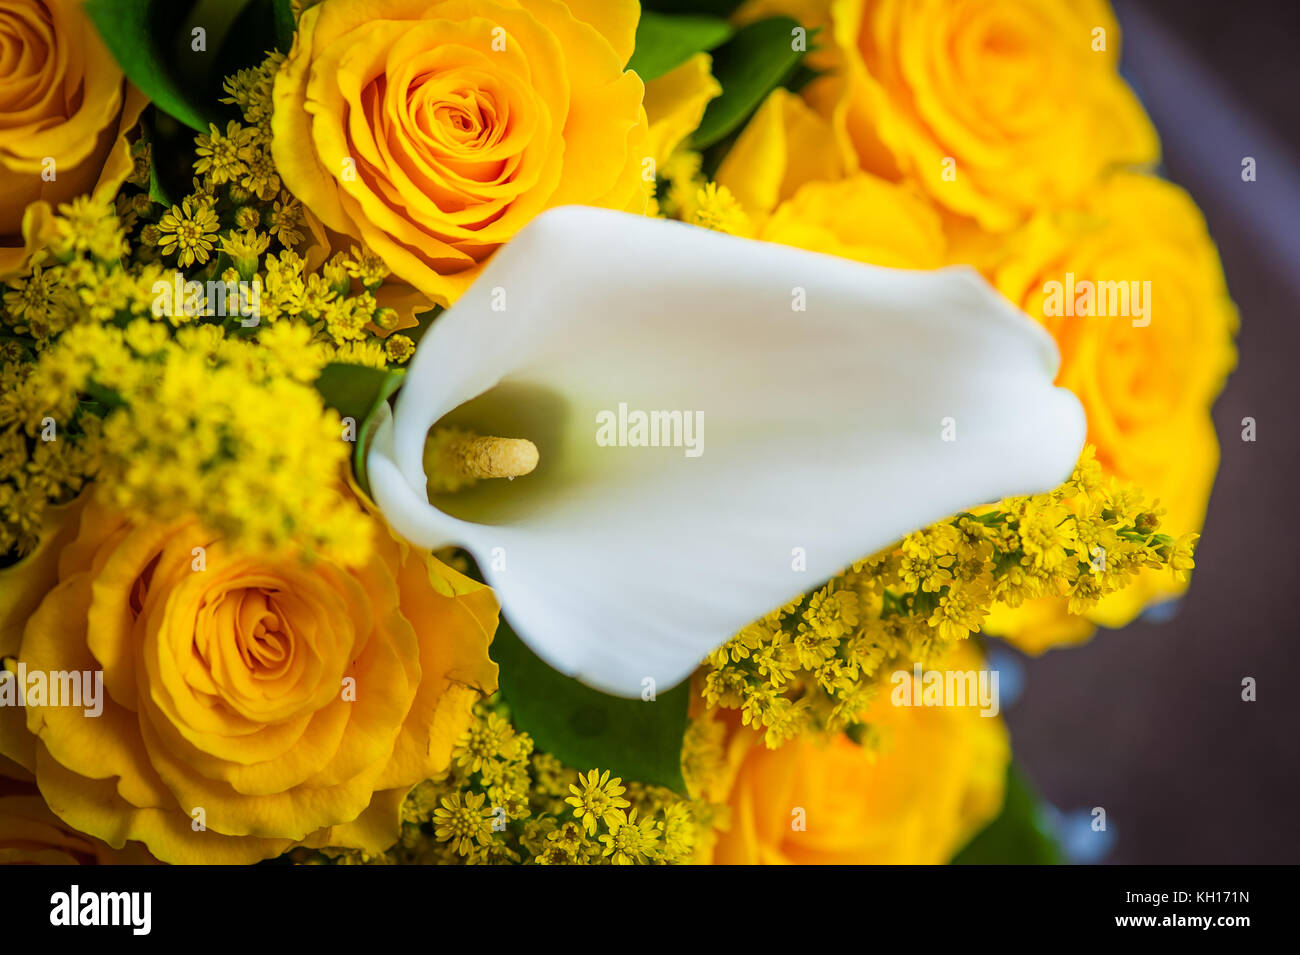 Close up of a beautiful yellow rose and white lily bridal flower arrangement Stock Photo